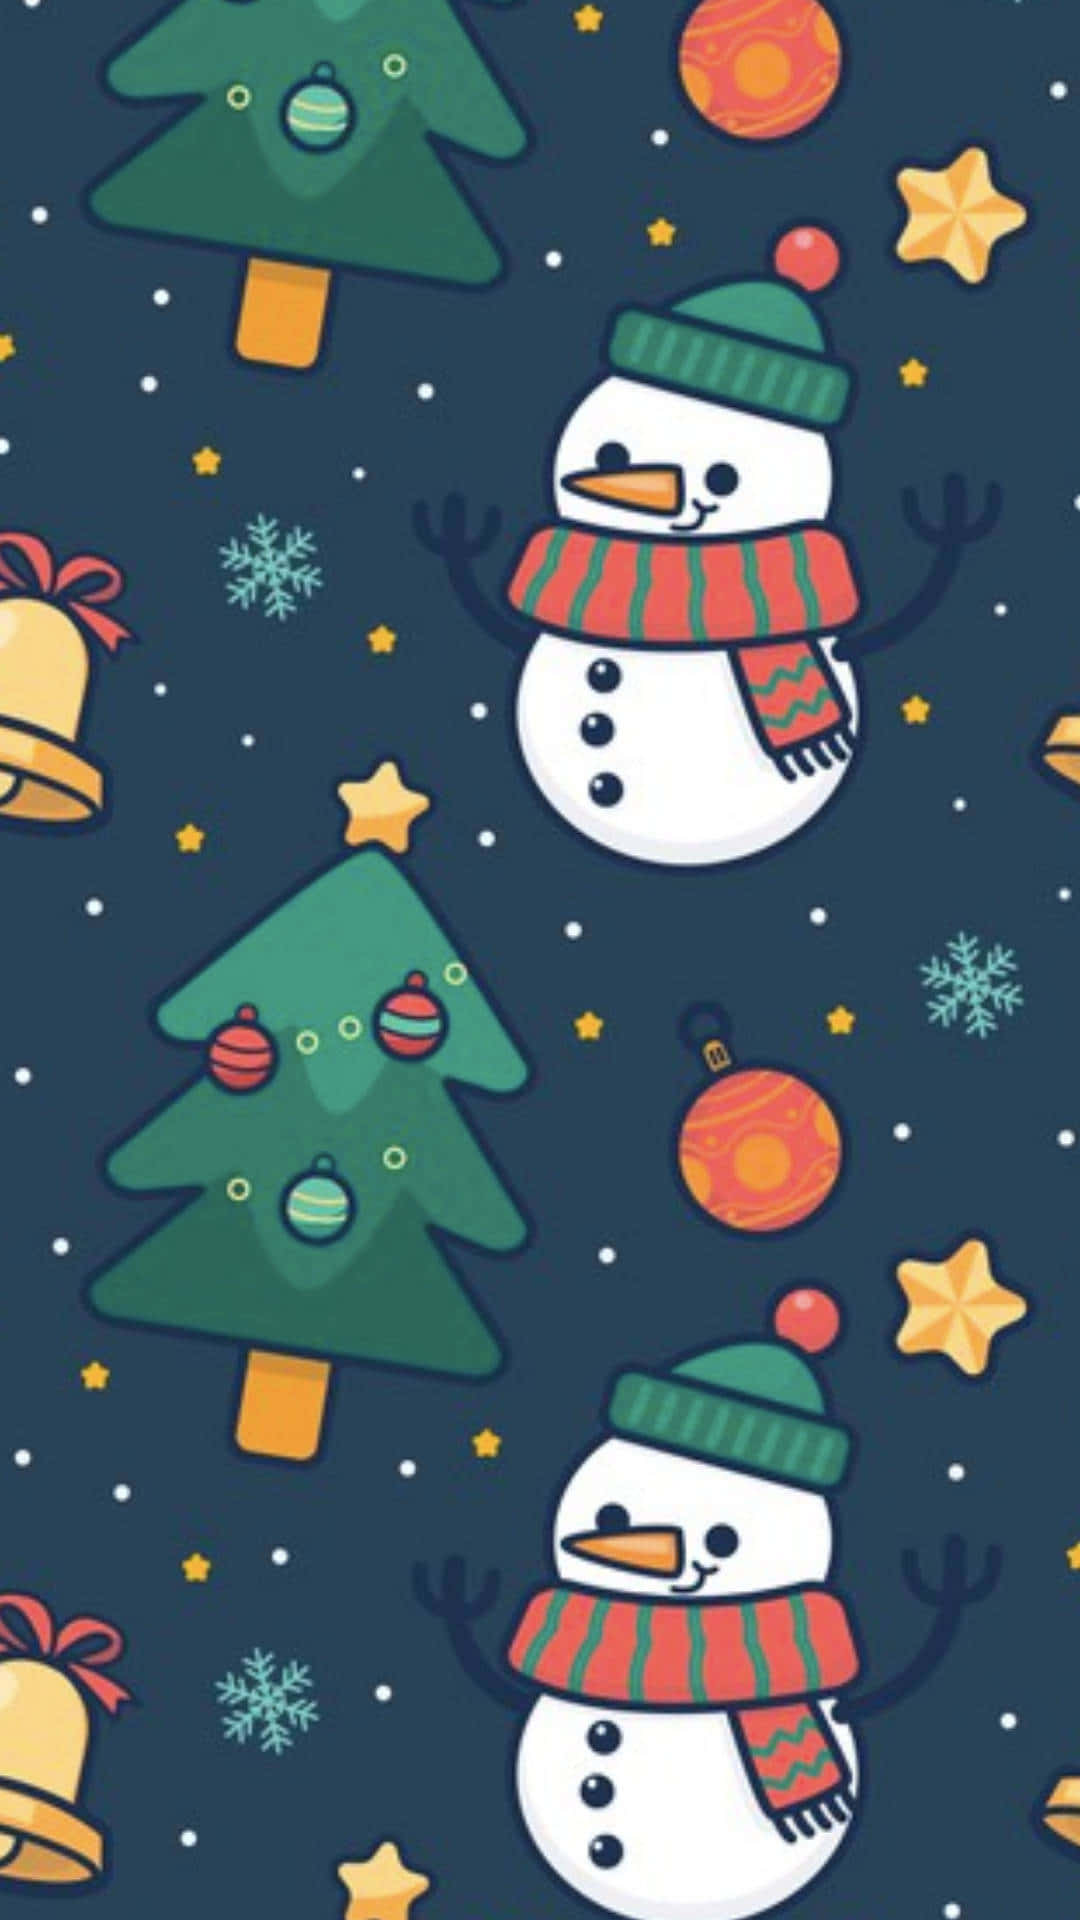 “Make the Holidays Bright with this Adorable Christmas Tree” Wallpaper